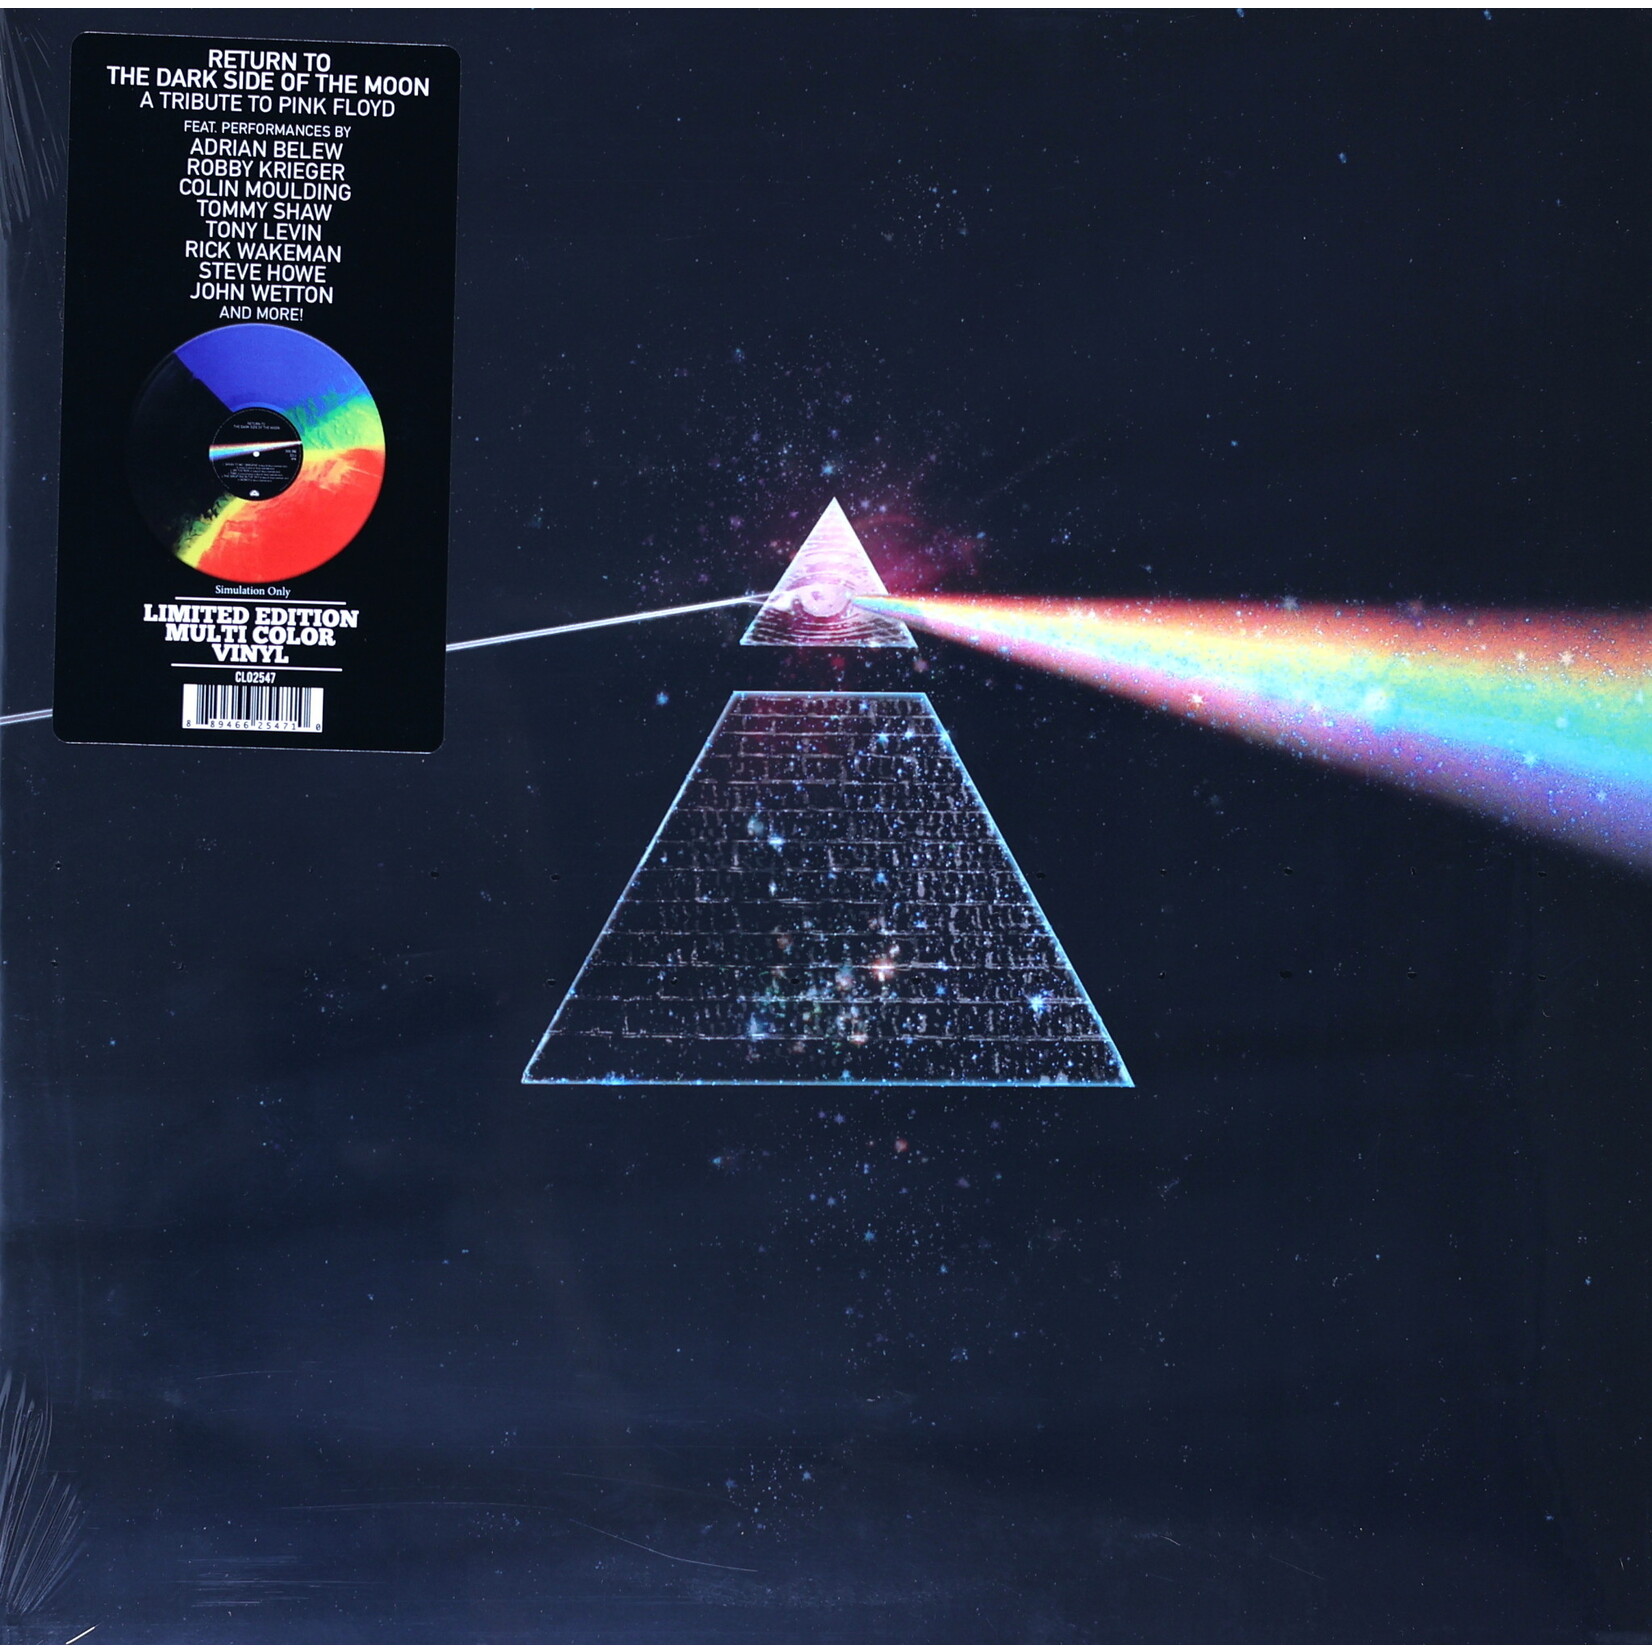 VARIOUS ARTISTS -  RETURN TO THE DARK SIDE OF THE MOON - GATEFOLD USA IMPORT COLORED LP